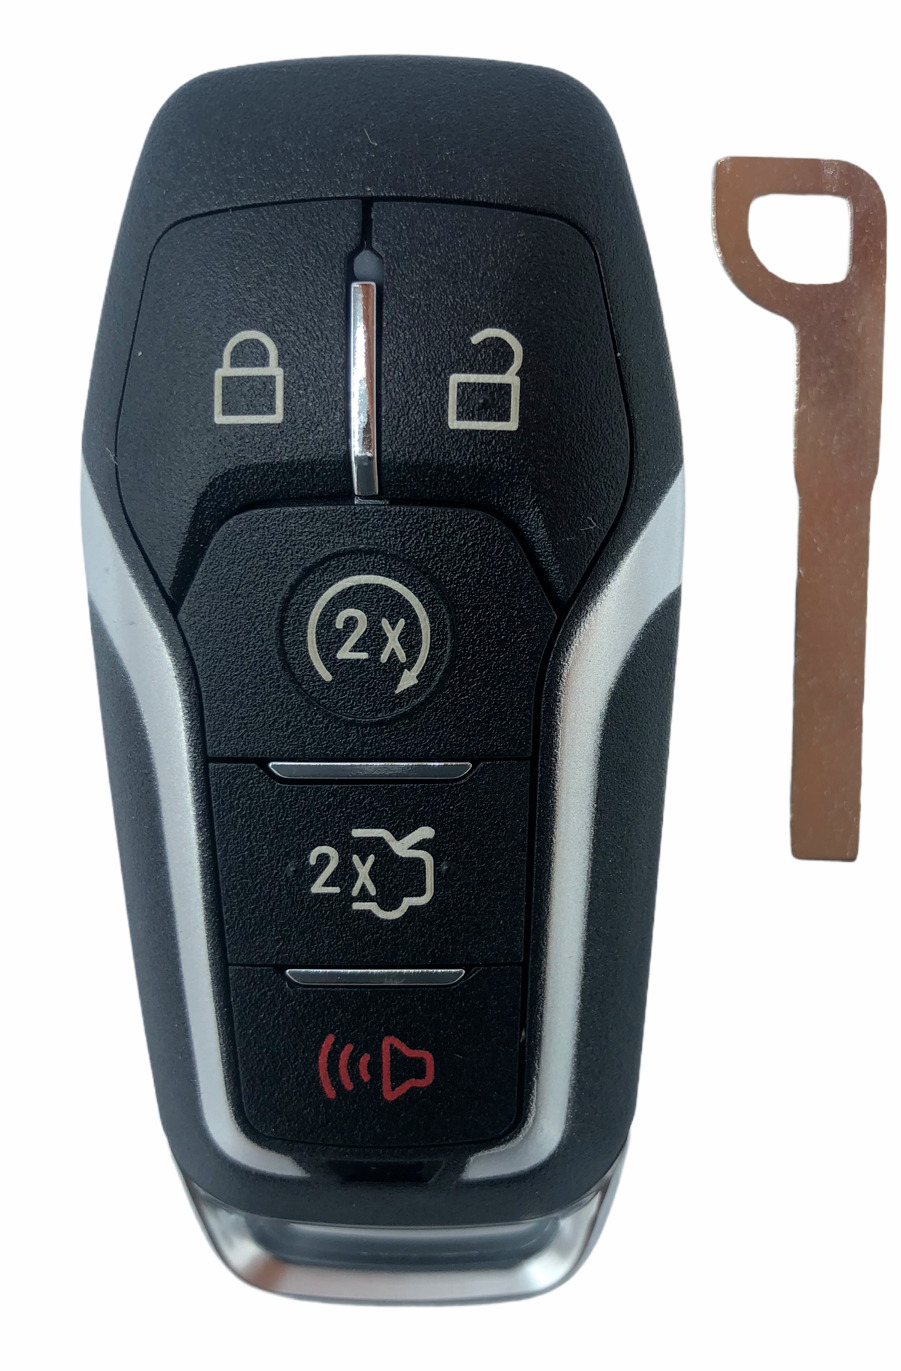 Replacement for Ford Explorer 2016 2017  Smart Remote Key Fob M3N-A2C31243300